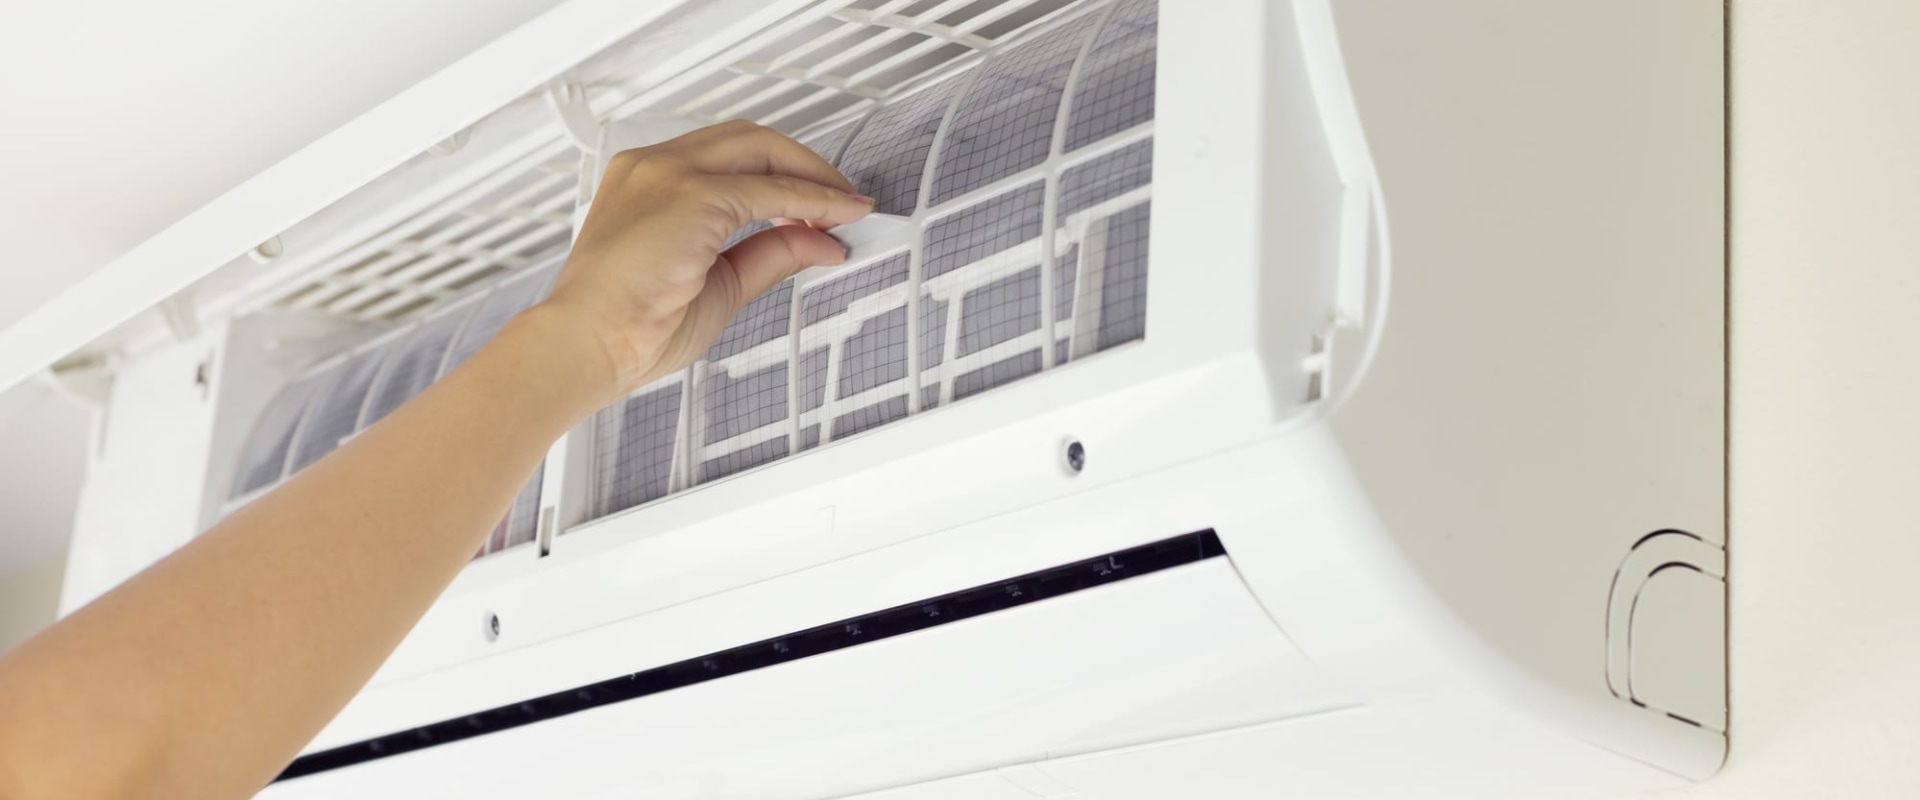 How to Check Your Air Conditioner Filter and Improve Air Flow